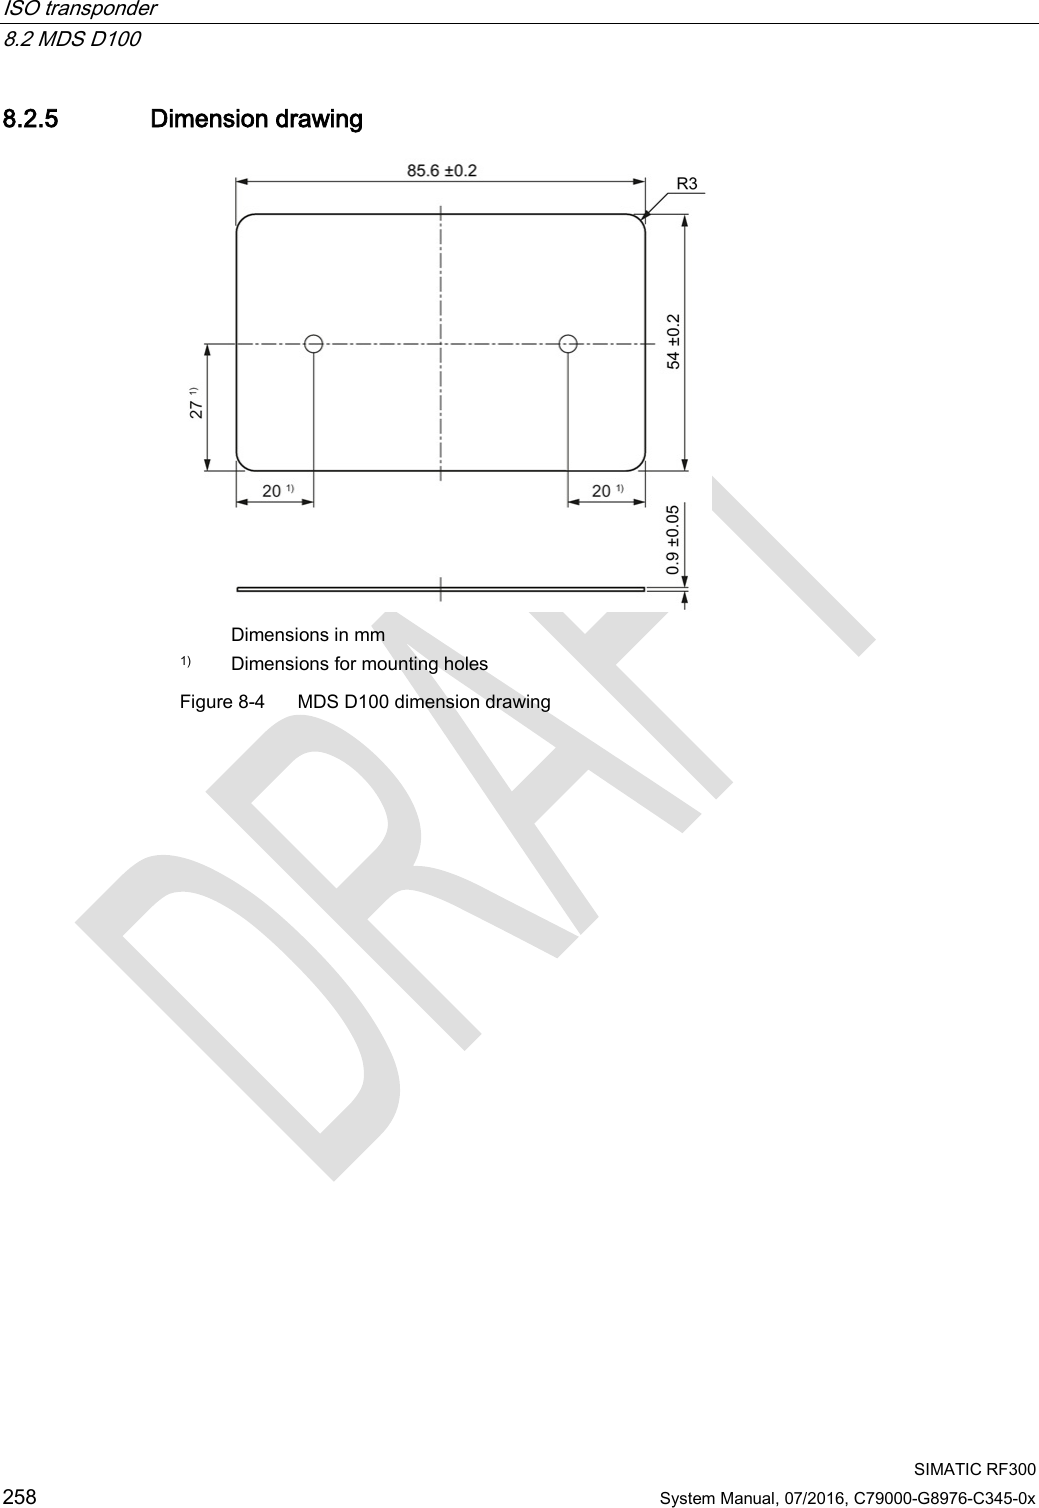 ISO transponder   8.2 MDS D100  SIMATIC RF300 258 System Manual, 07/2016, C79000-G8976-C345-0x 8.2.5 Dimension drawing   Dimensions in mm 1) Dimensions for mounting holes Figure 8-4  MDS D100 dimension drawing  